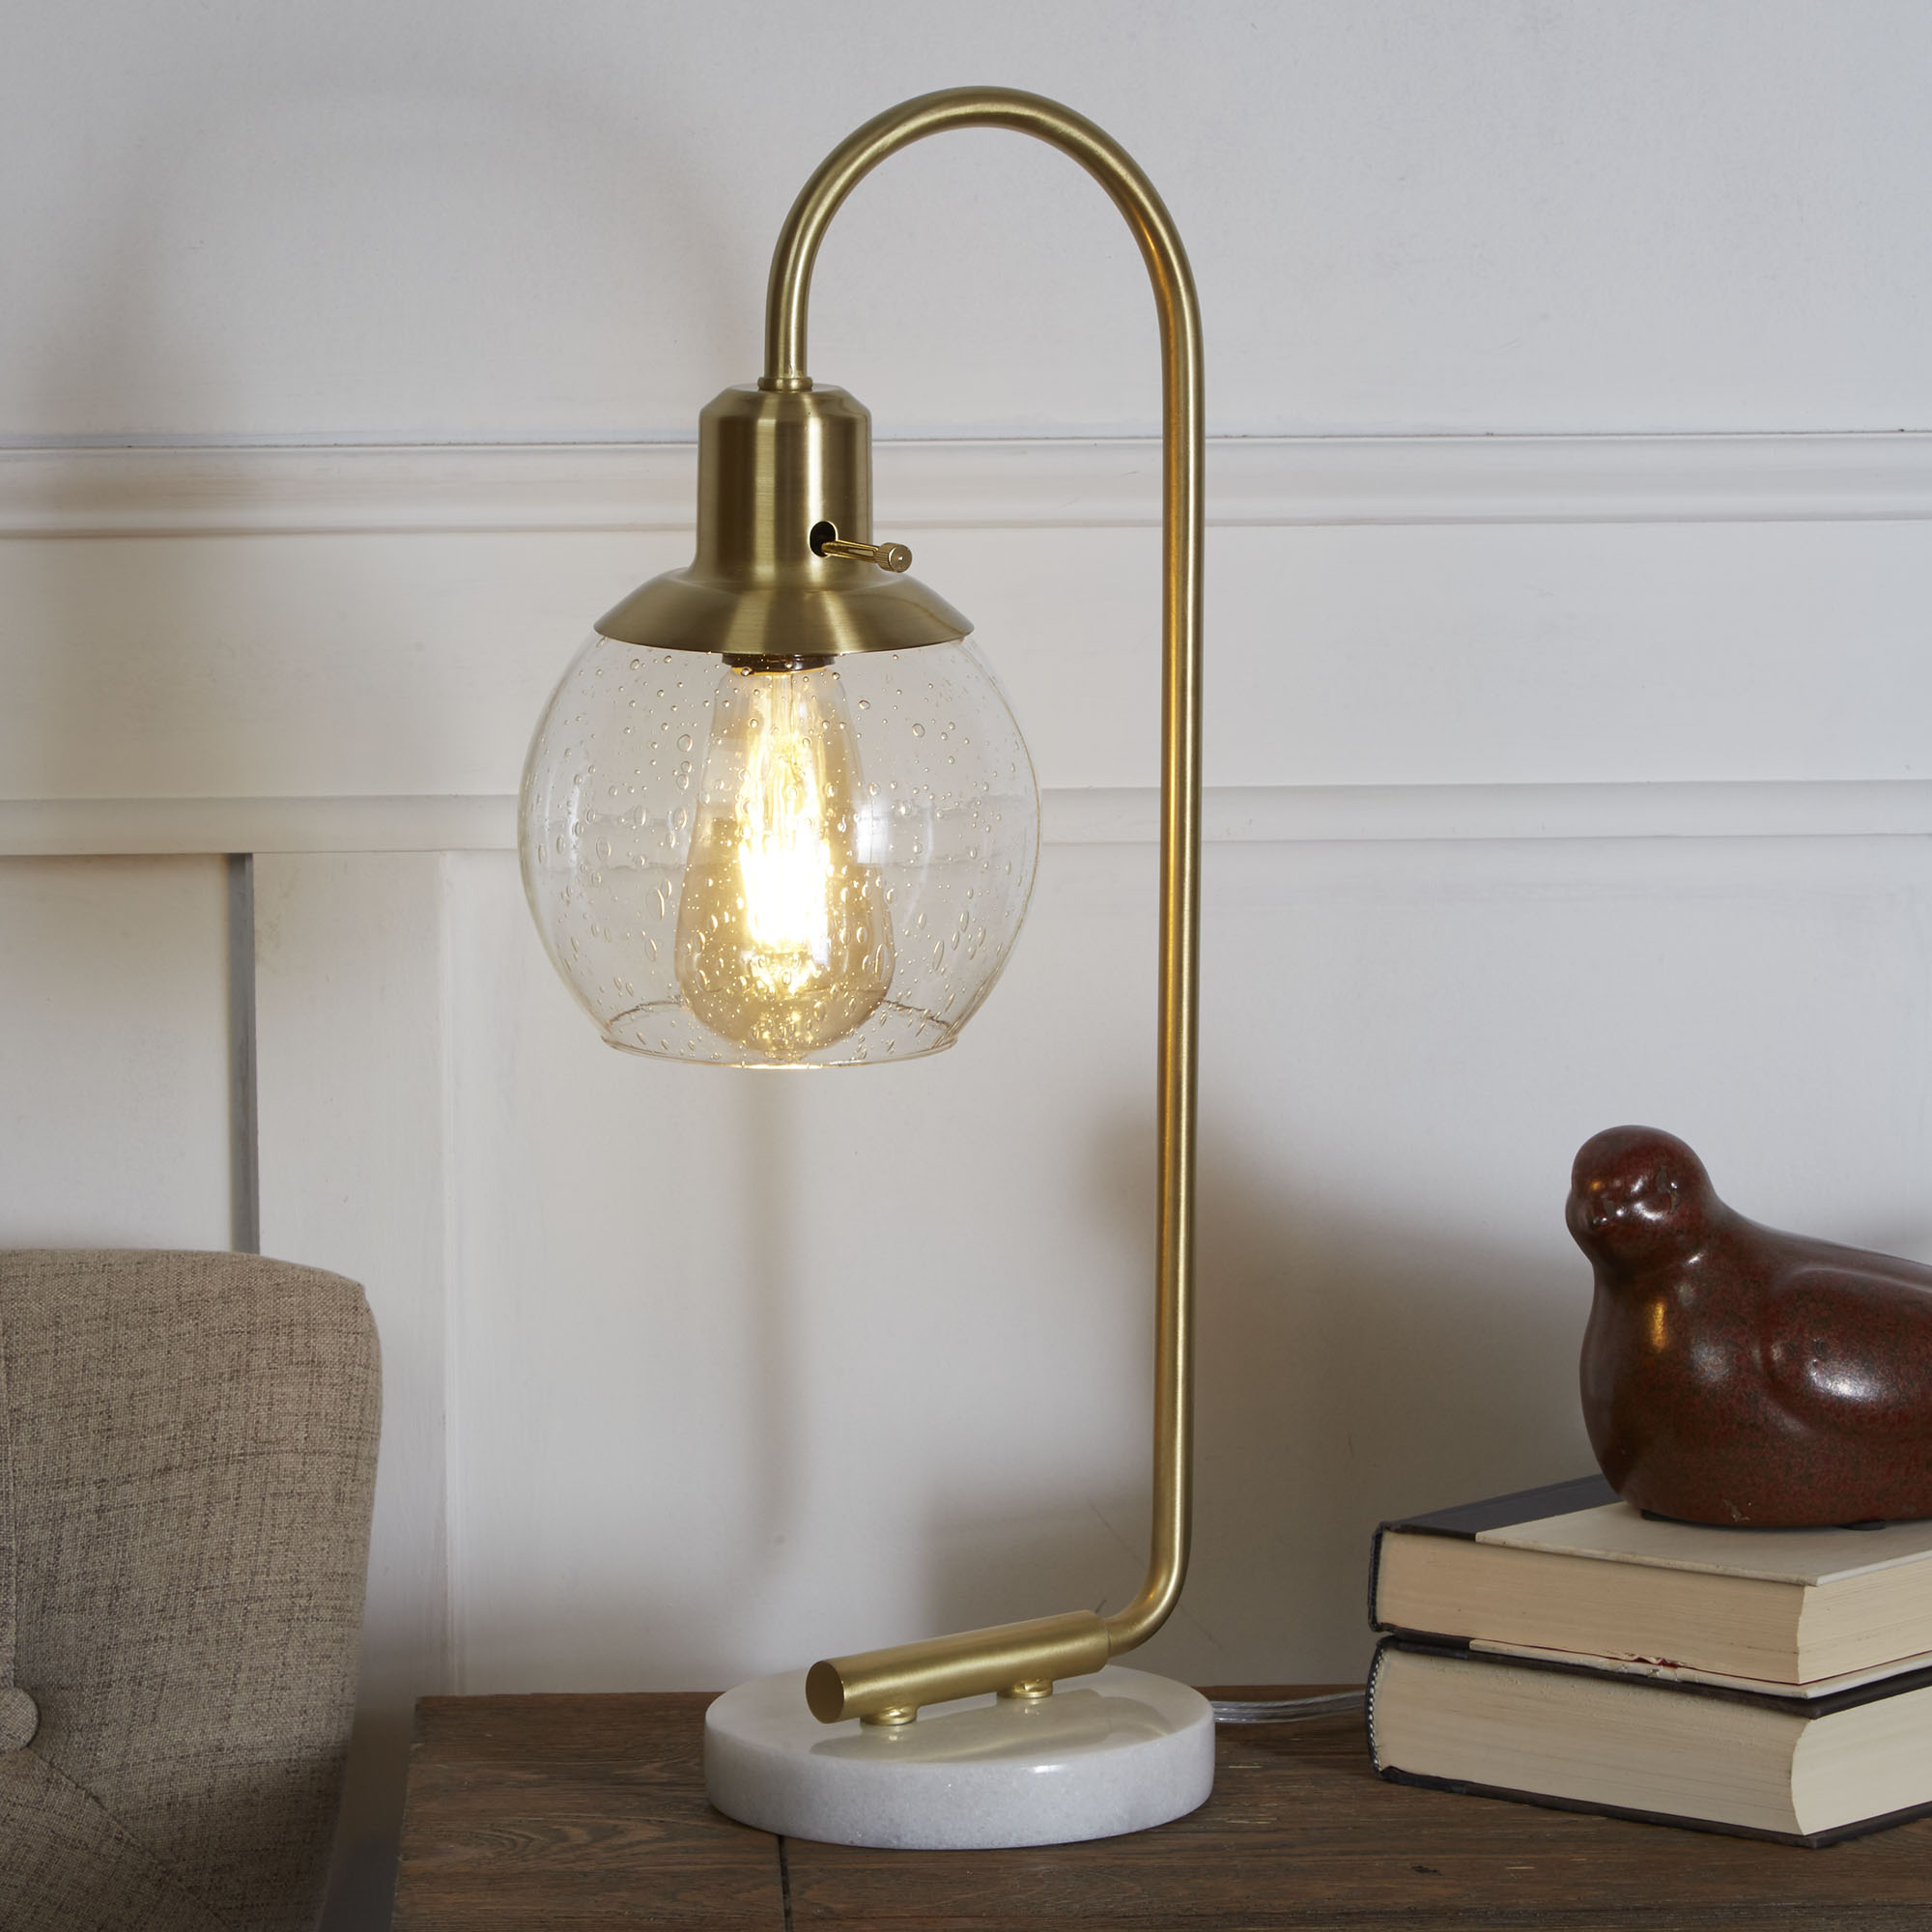 Better Homes & Gardens Real Marble Table Lamp, Brushed Brass Finish - image 5 of 5